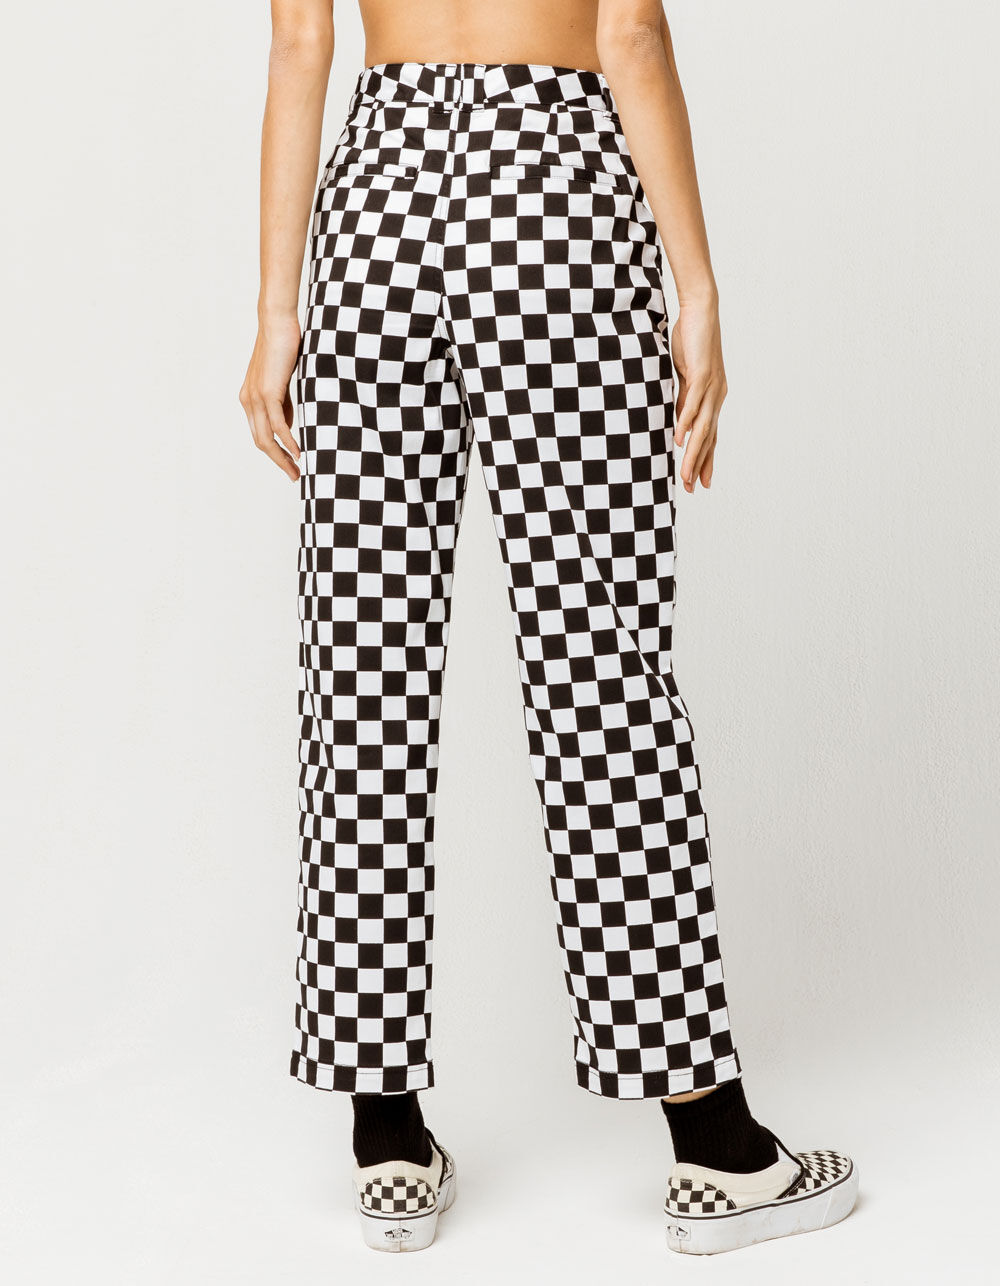 UO Printed Checkerboard Beach Pant | Urban Outfitters Japan - Clothing,  Music, Home & Accessories